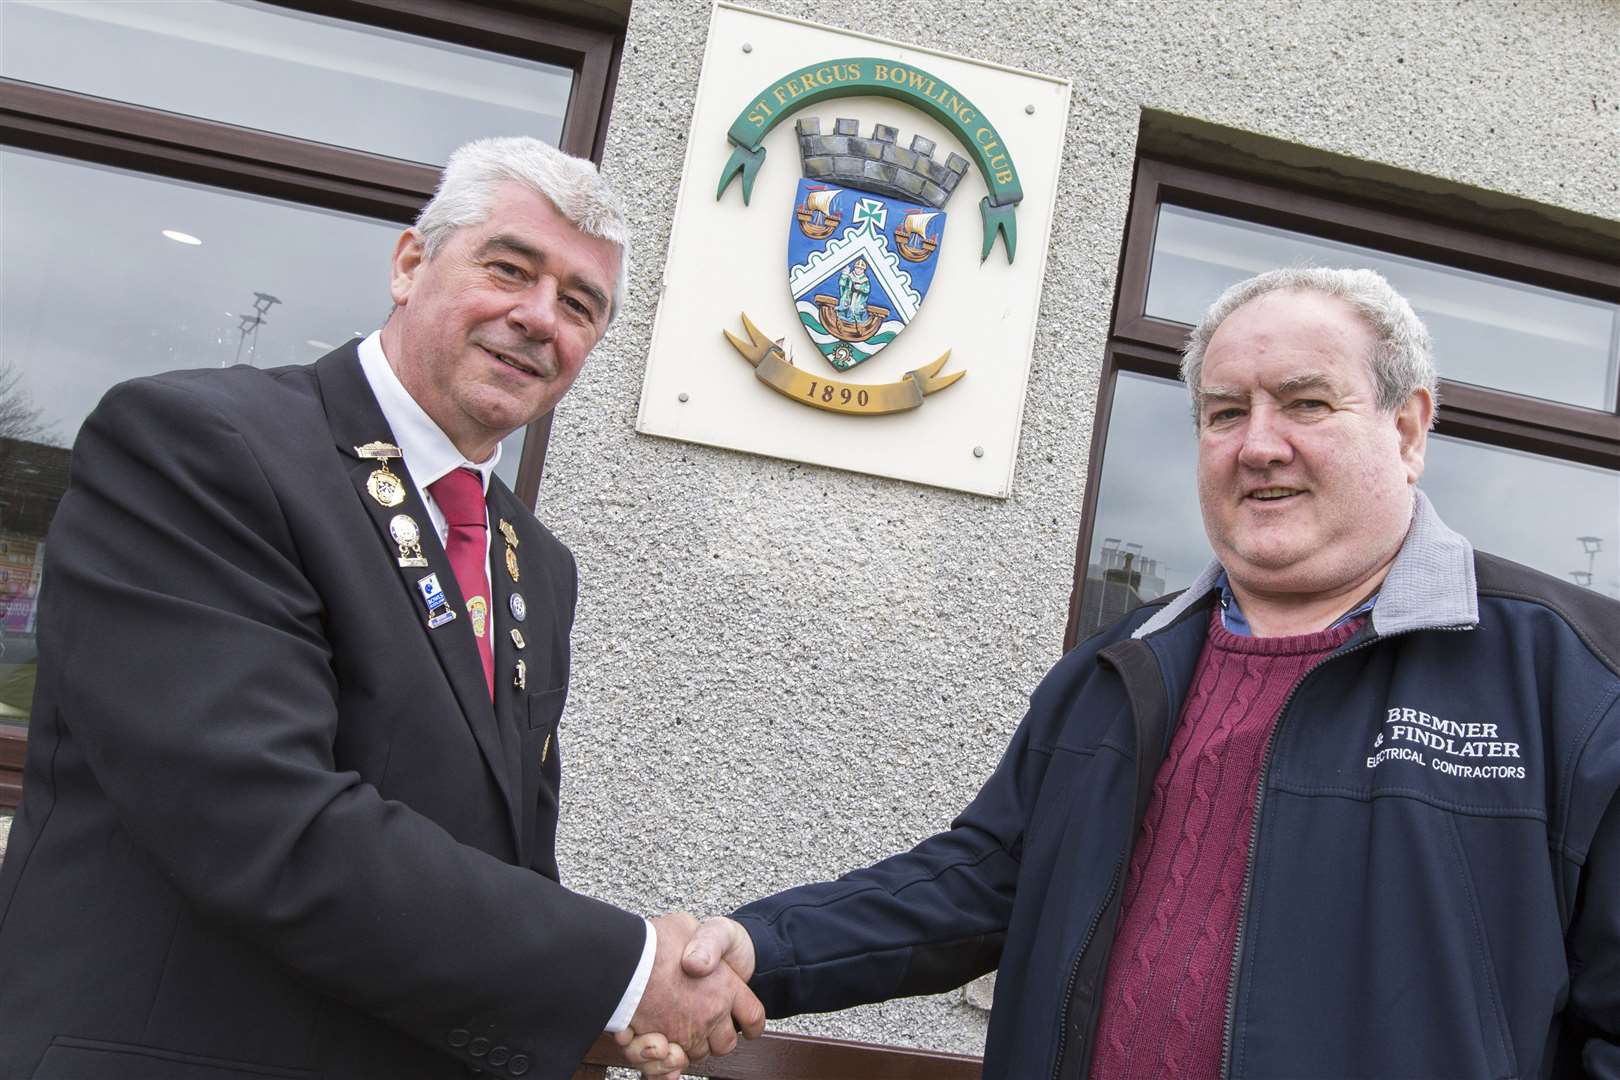 Robert Bremner (right), of Bremner and Findlater Electrical Contractors, was presented with an honorary life membership of St Fergus Bowling Club. He is pictured with club president Malky Mackay. Picture: Robert MacDonald / Northern Studios